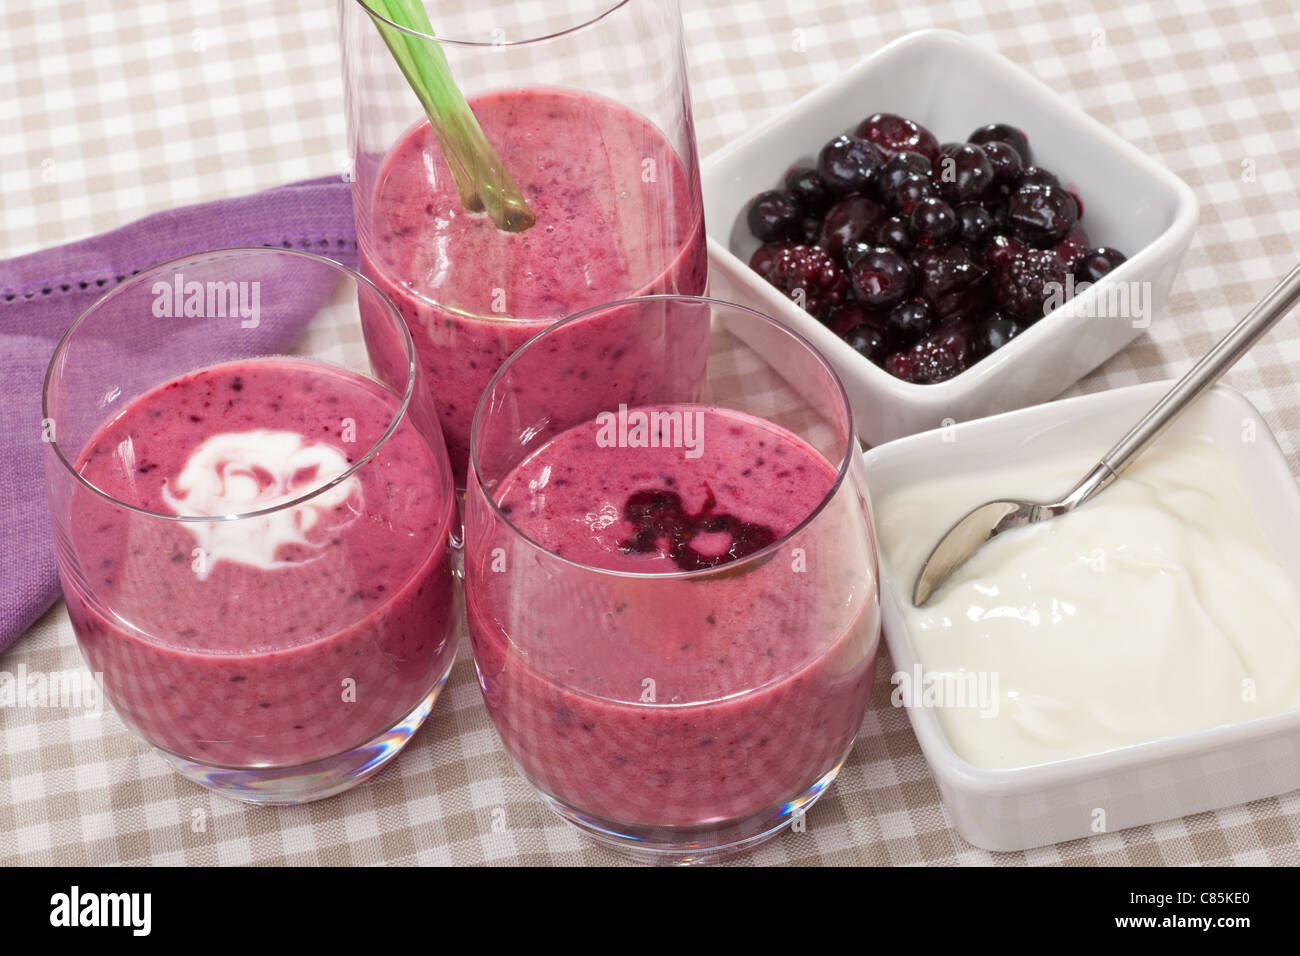 Berrie smoothies Banque D'Images